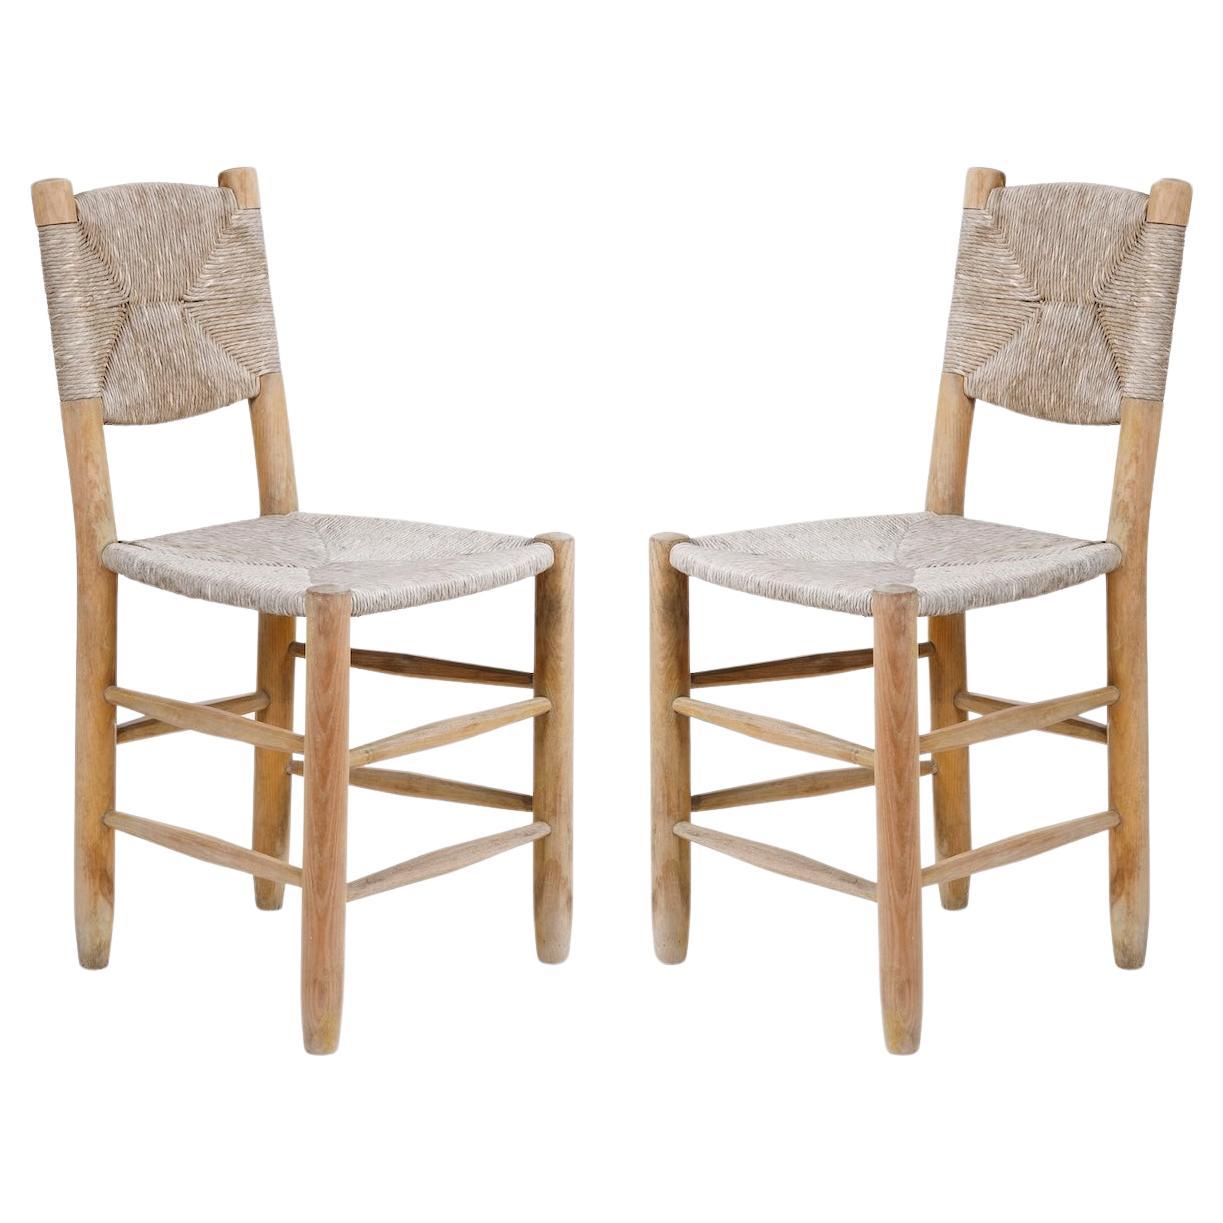 Pair of Bauche chairs by Charlotte Perriand, France, 1950s For Sale